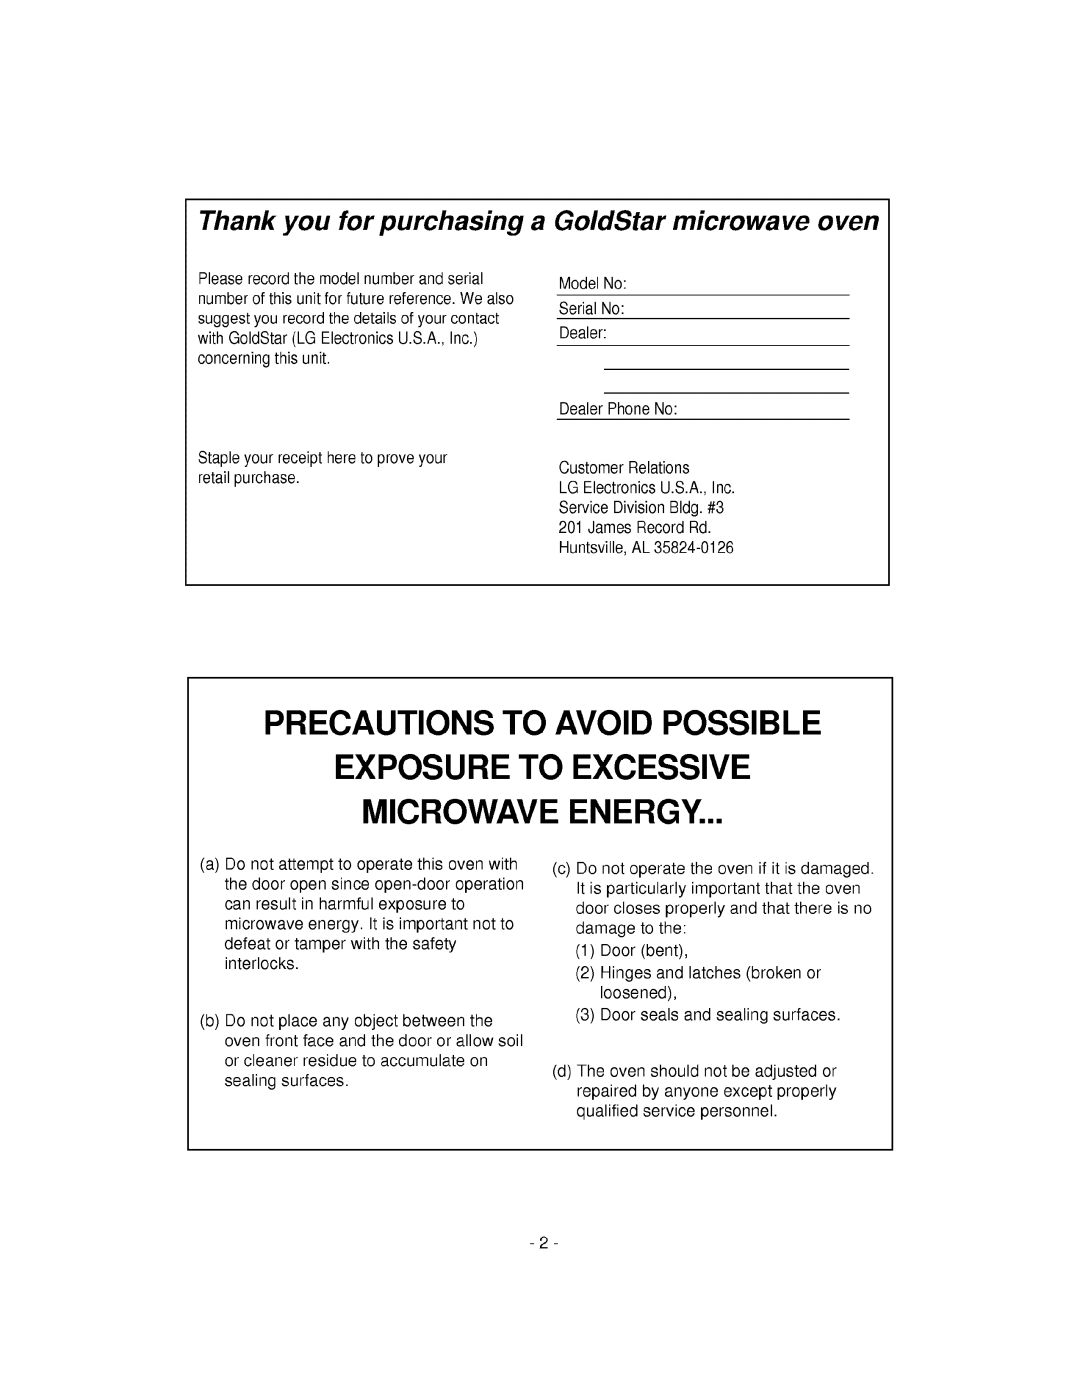 LG Electronics MV-1310W, MV-1310B owner manual Precautions To Avoid Possible, Exposure To Excessive Microwave Energy 